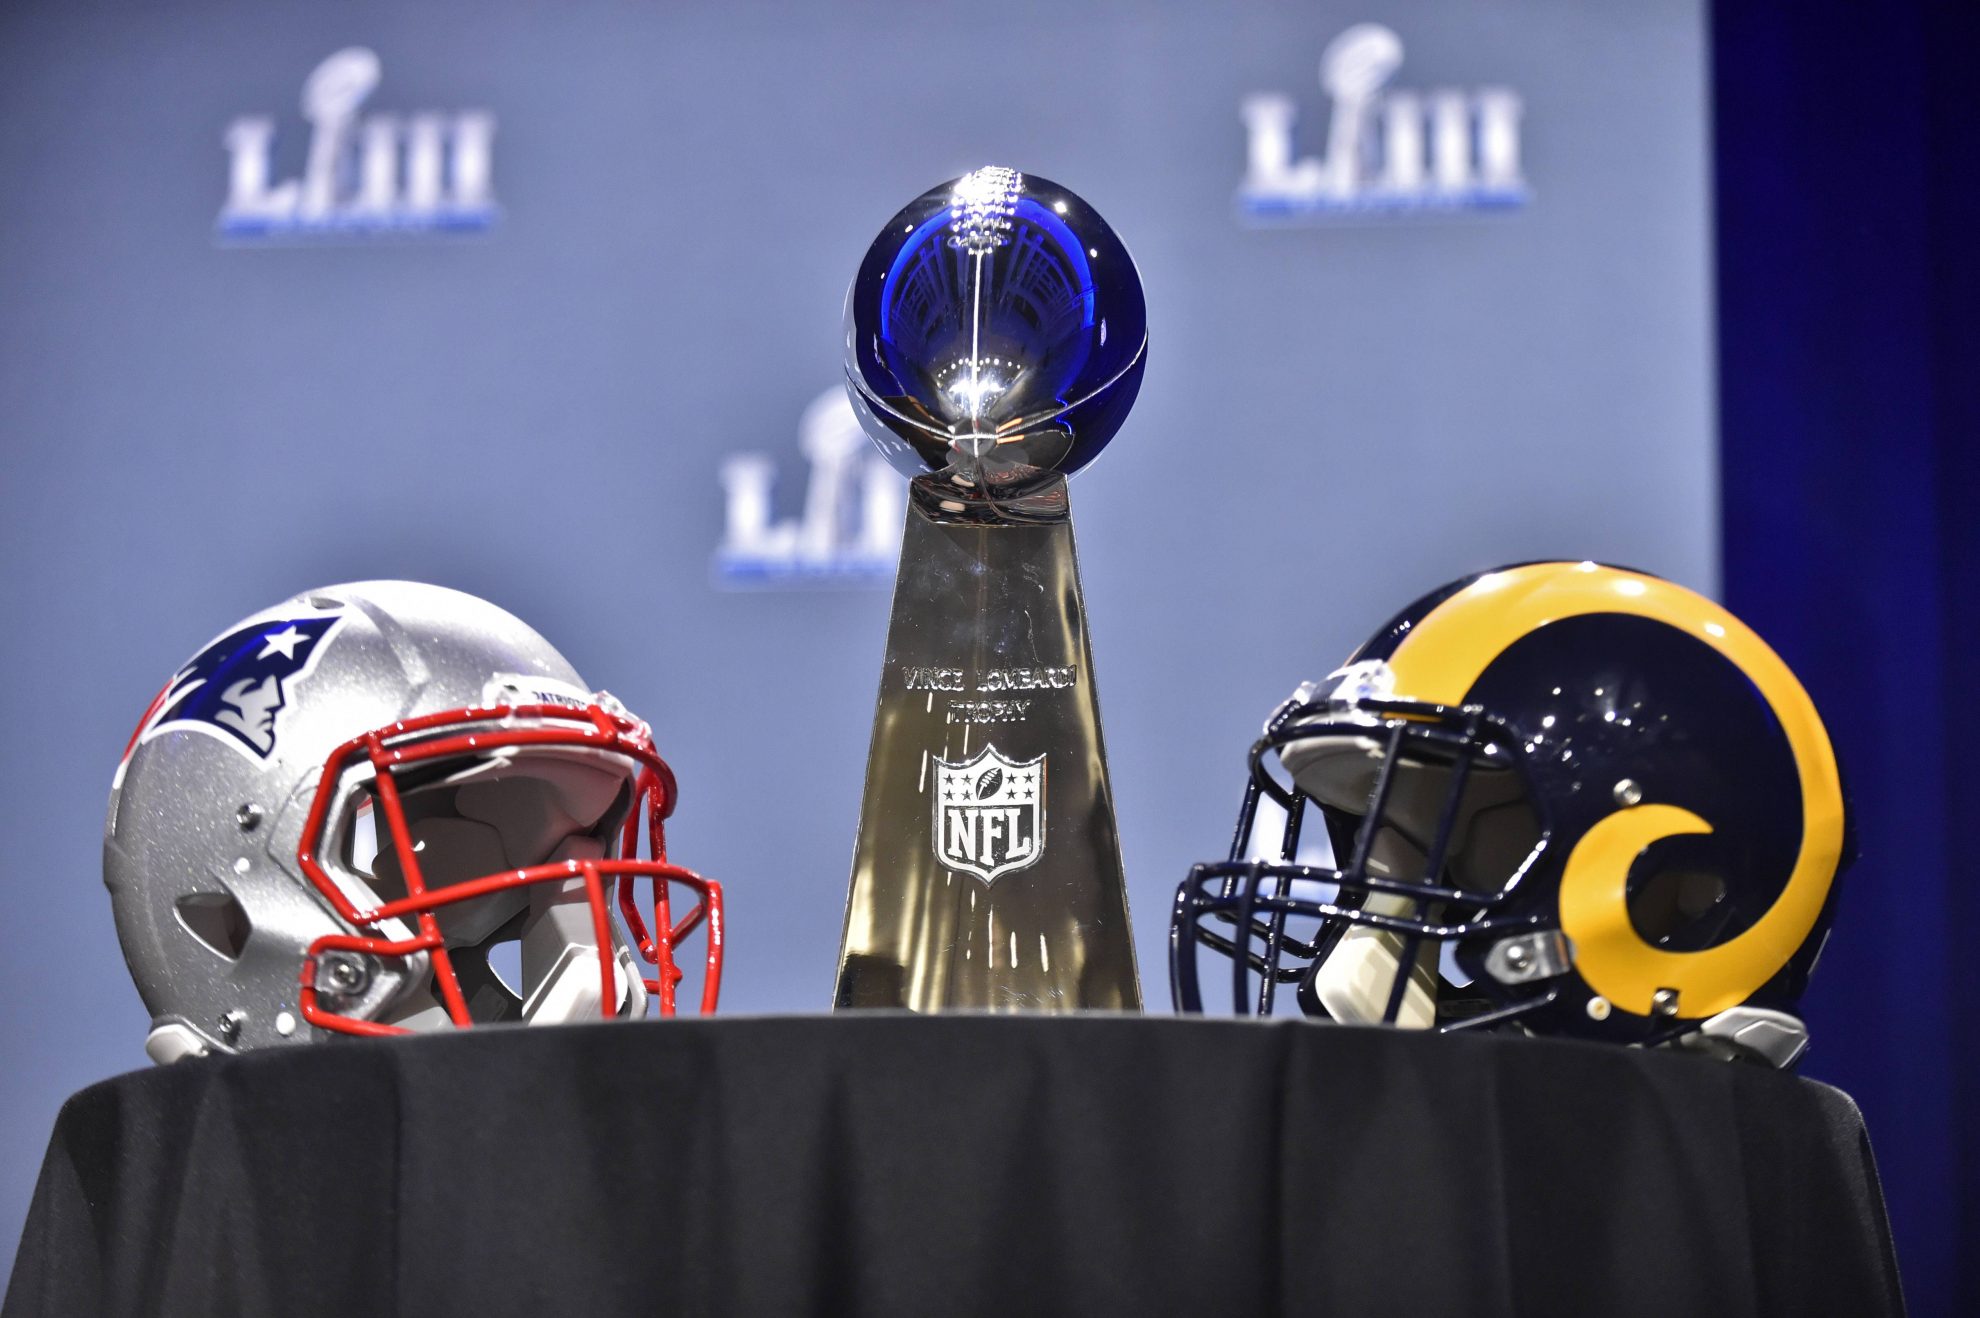 ATLANTA, GA - JANUARY 30: The Vince Lombardi Trophy sits on a table between the New England Patriots and Los Angeles Rams helmets prior to NFL American Football Herren USA Commissioner Roger Goodell s press conference PK Pressekonferenz at the Georgia World Congress Center on January 30, 2019, in Atlanta, GA. (Photo by Austin McAfee/Icon Sportswire) NFL: JAN 30 Super Bowl LIII - Commissioner Roger Goodell Press Conference